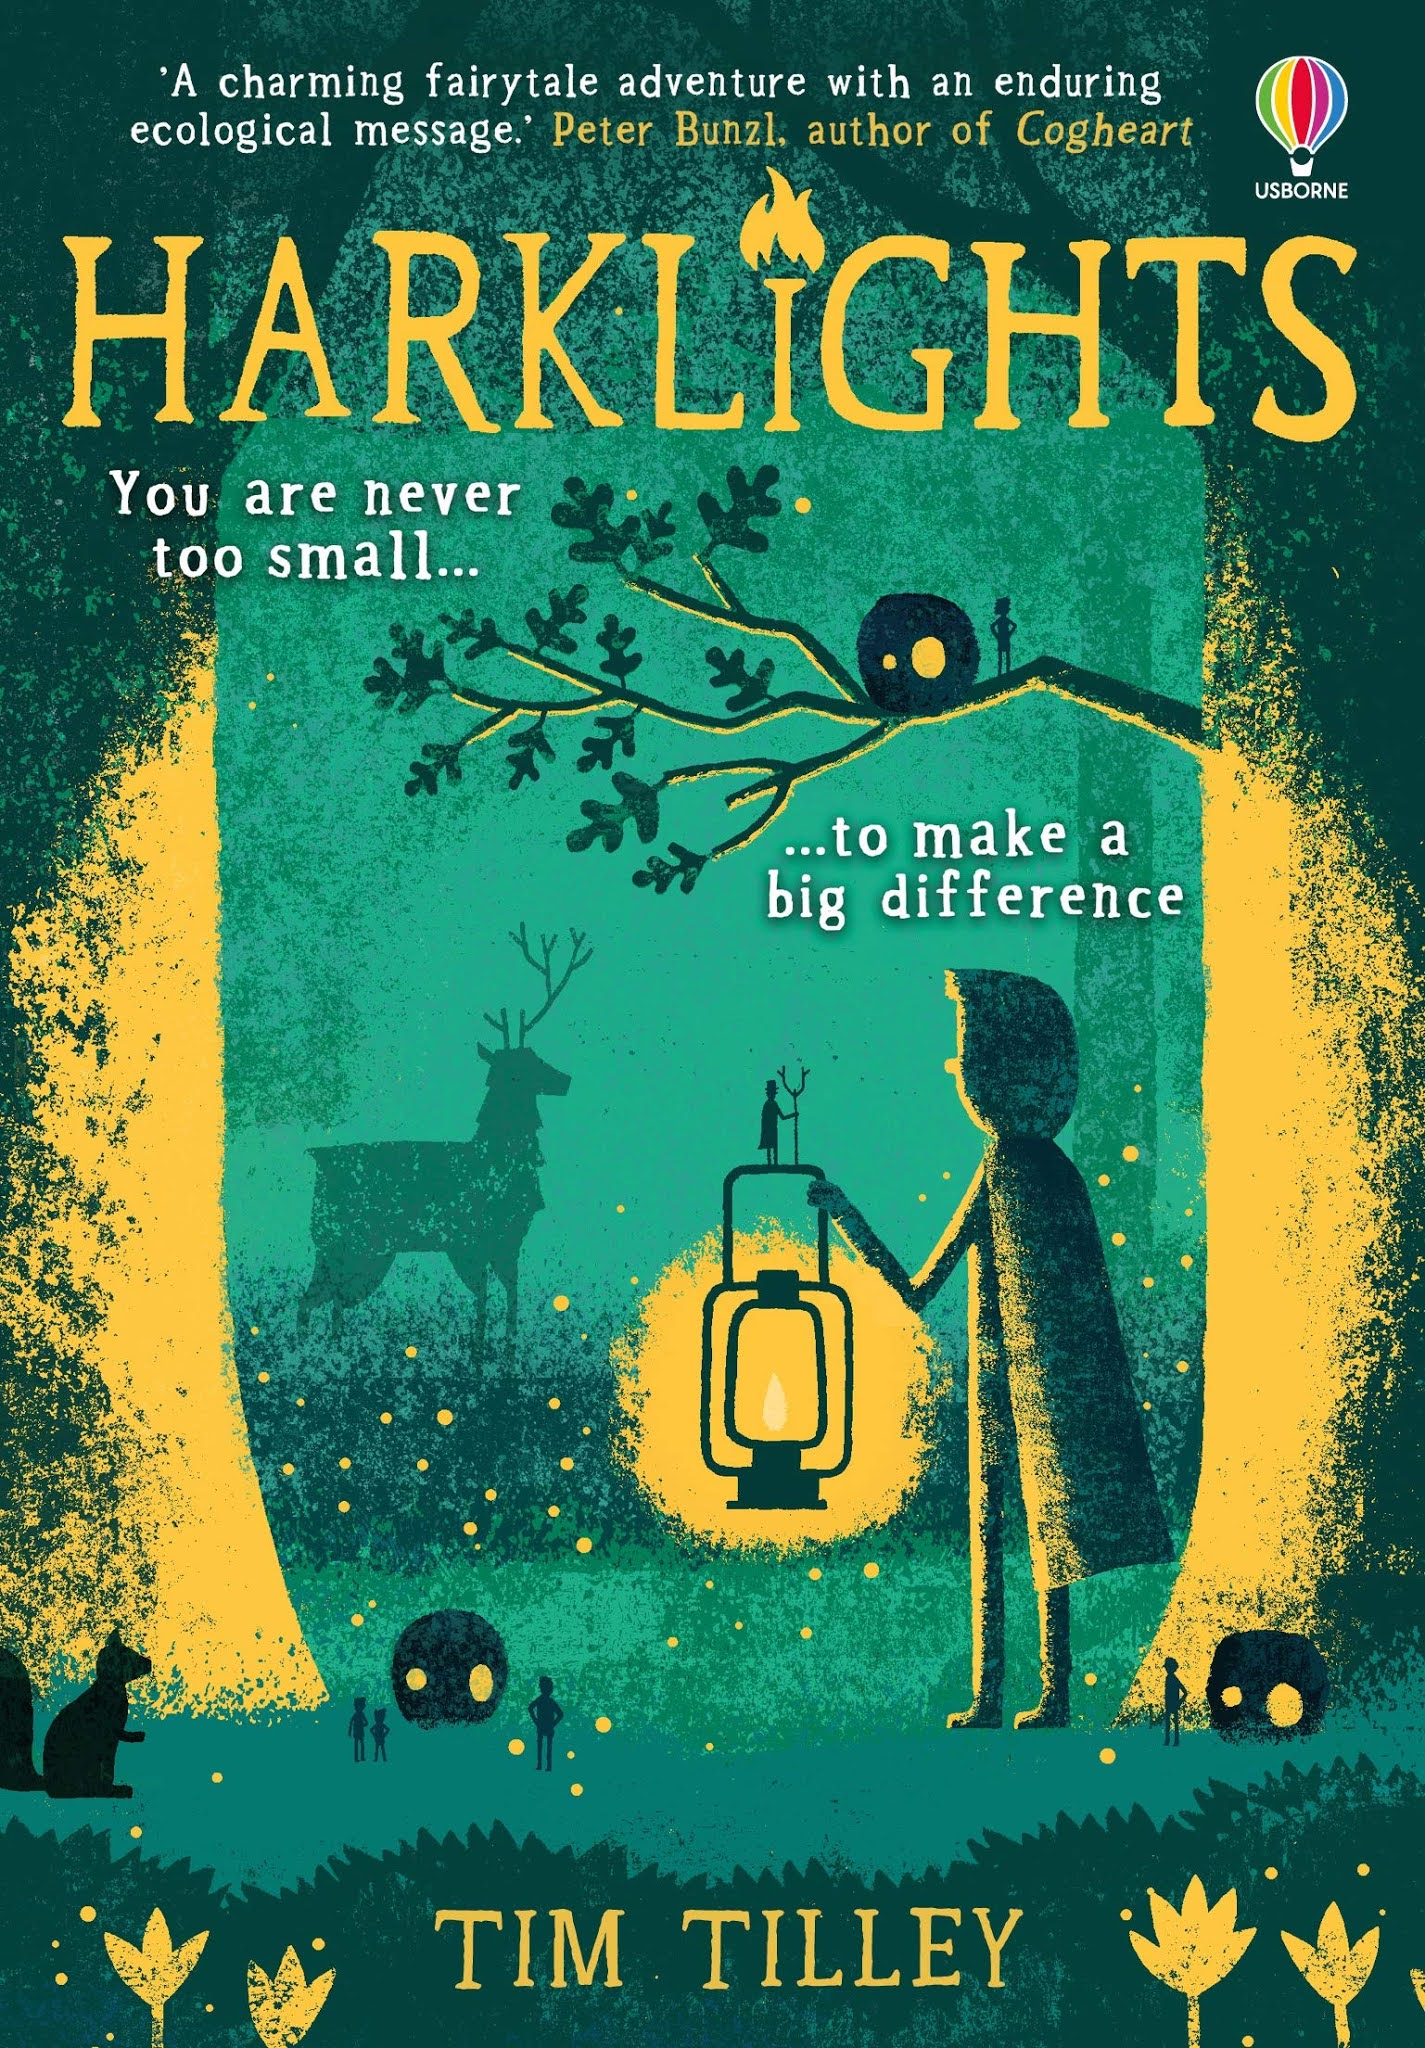 Tim Tilley (Author, Illustrator) - Harklights - Interview with Mr. Ripley's  Enchanted Books